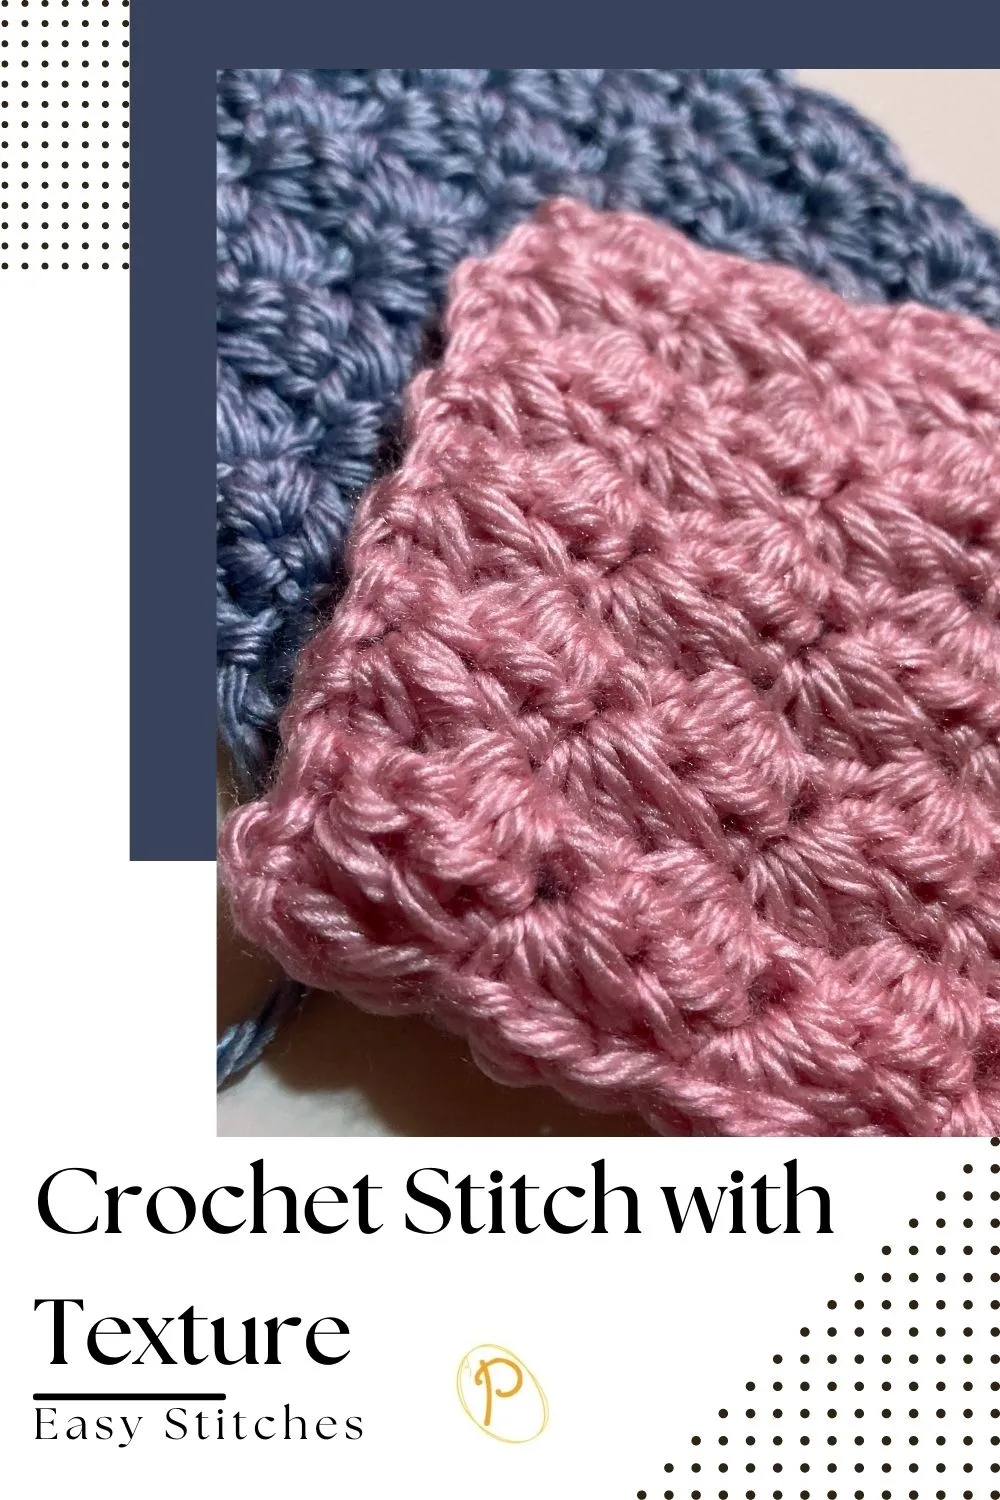 Crochet Stitch with Texture